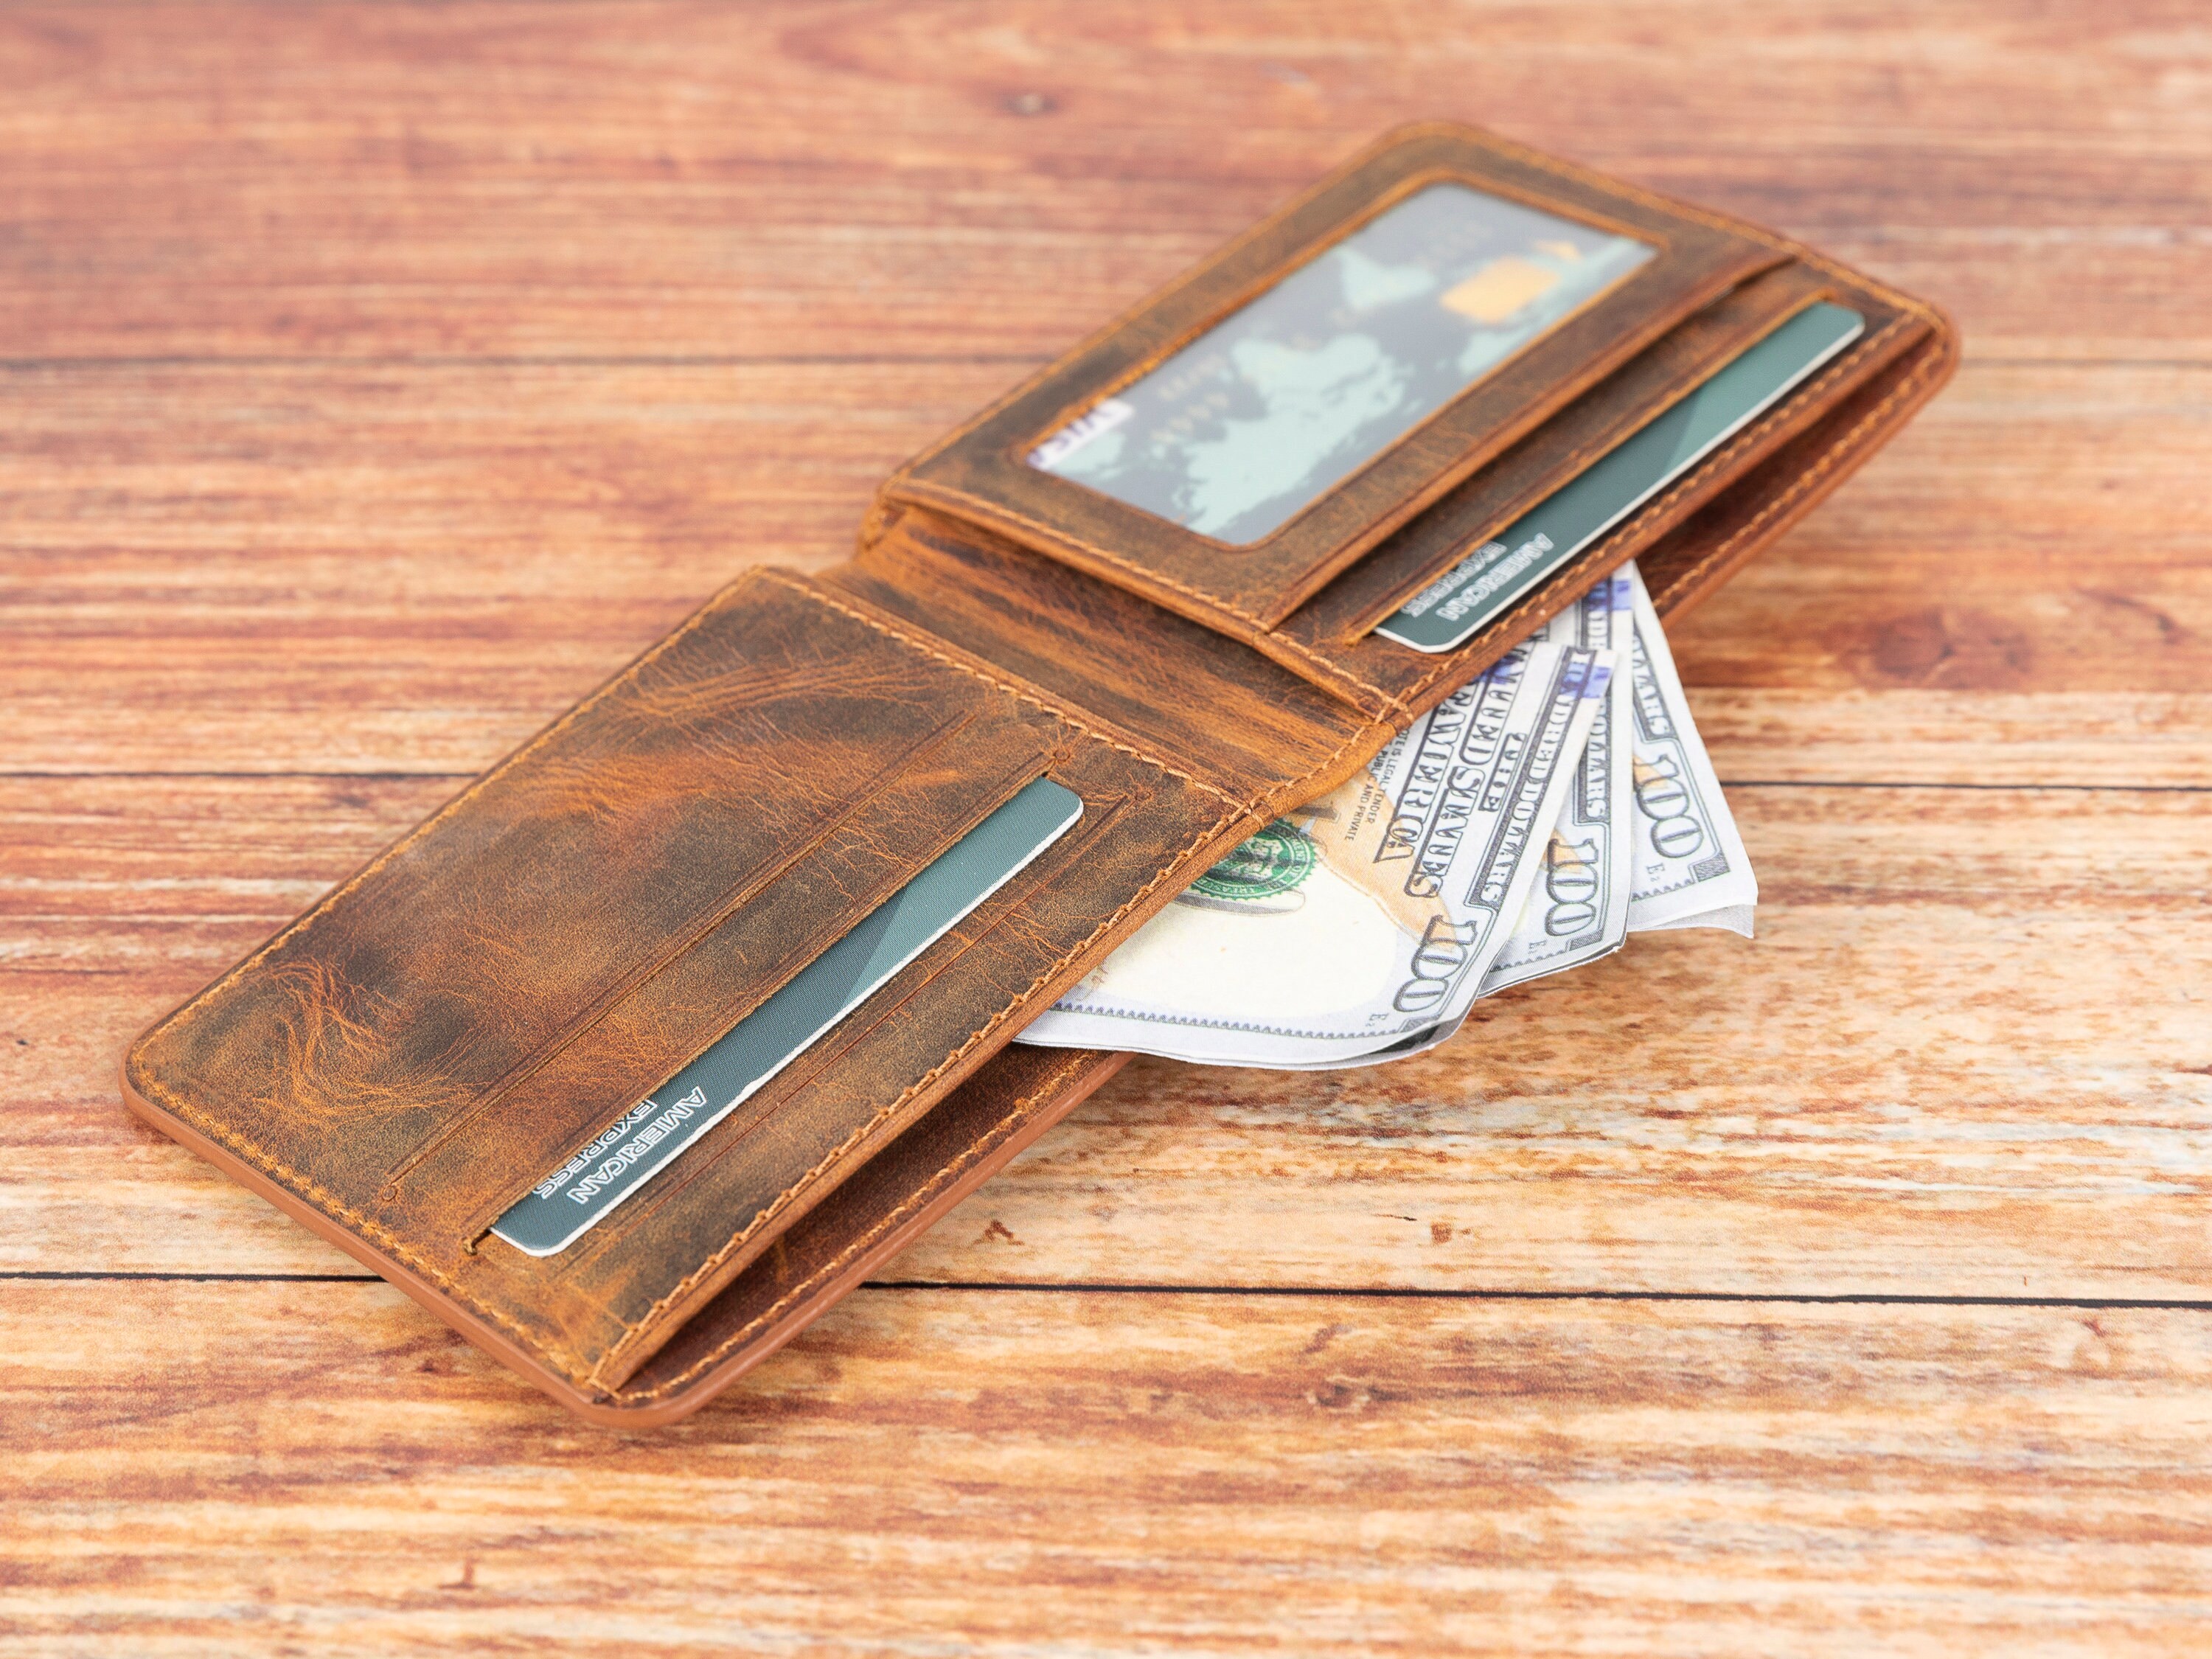 Men's Personalized Engraved Monogrammed Black Leather Wallet - Teals  Prairie & Co.®